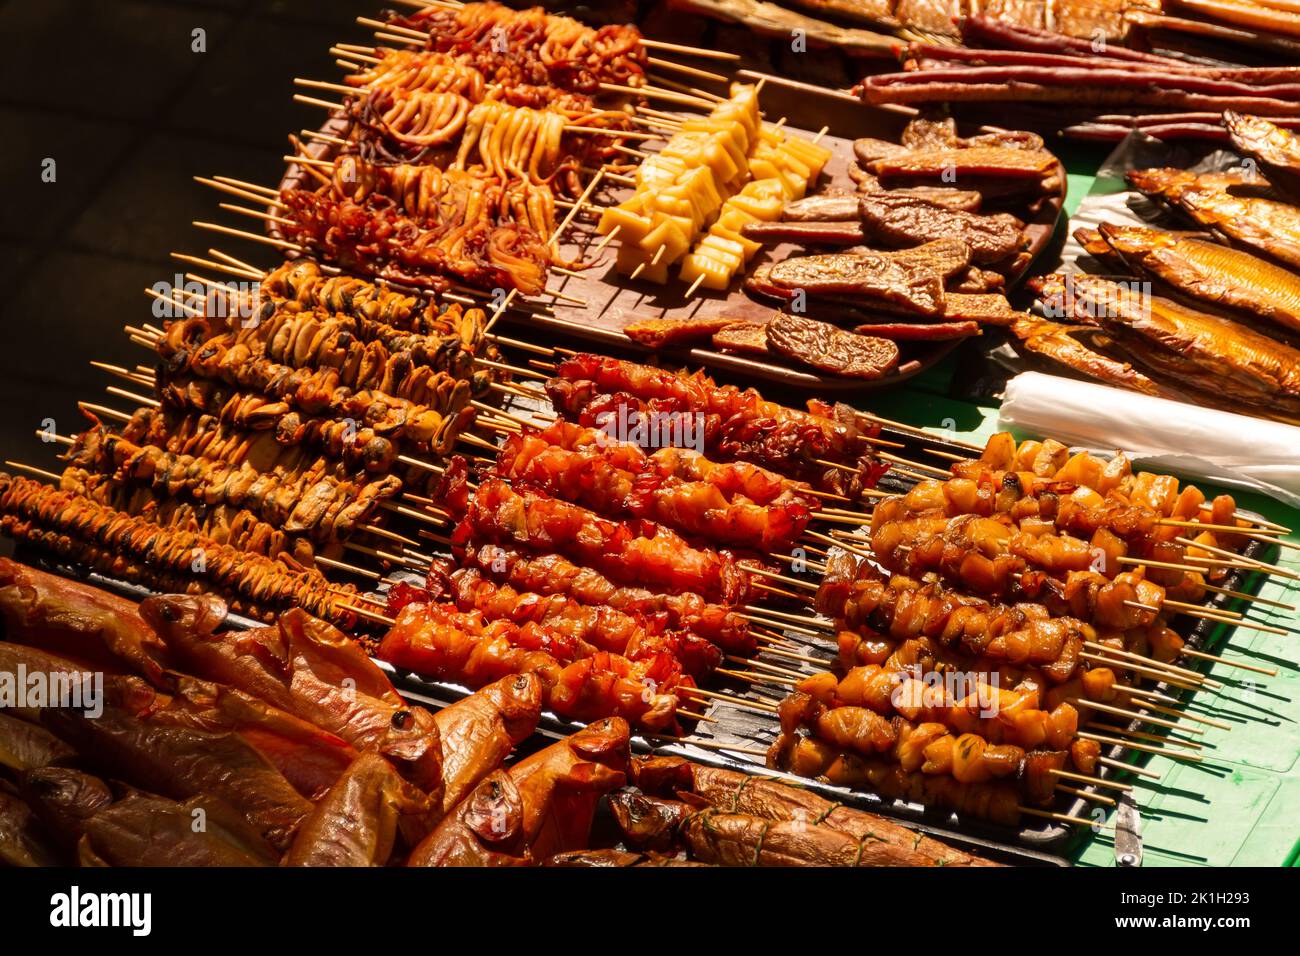 Mussels, squids, fish, shrimps and many other smoked and dried seafood on the market counter. Meat on skewers, sticks Stock Photo